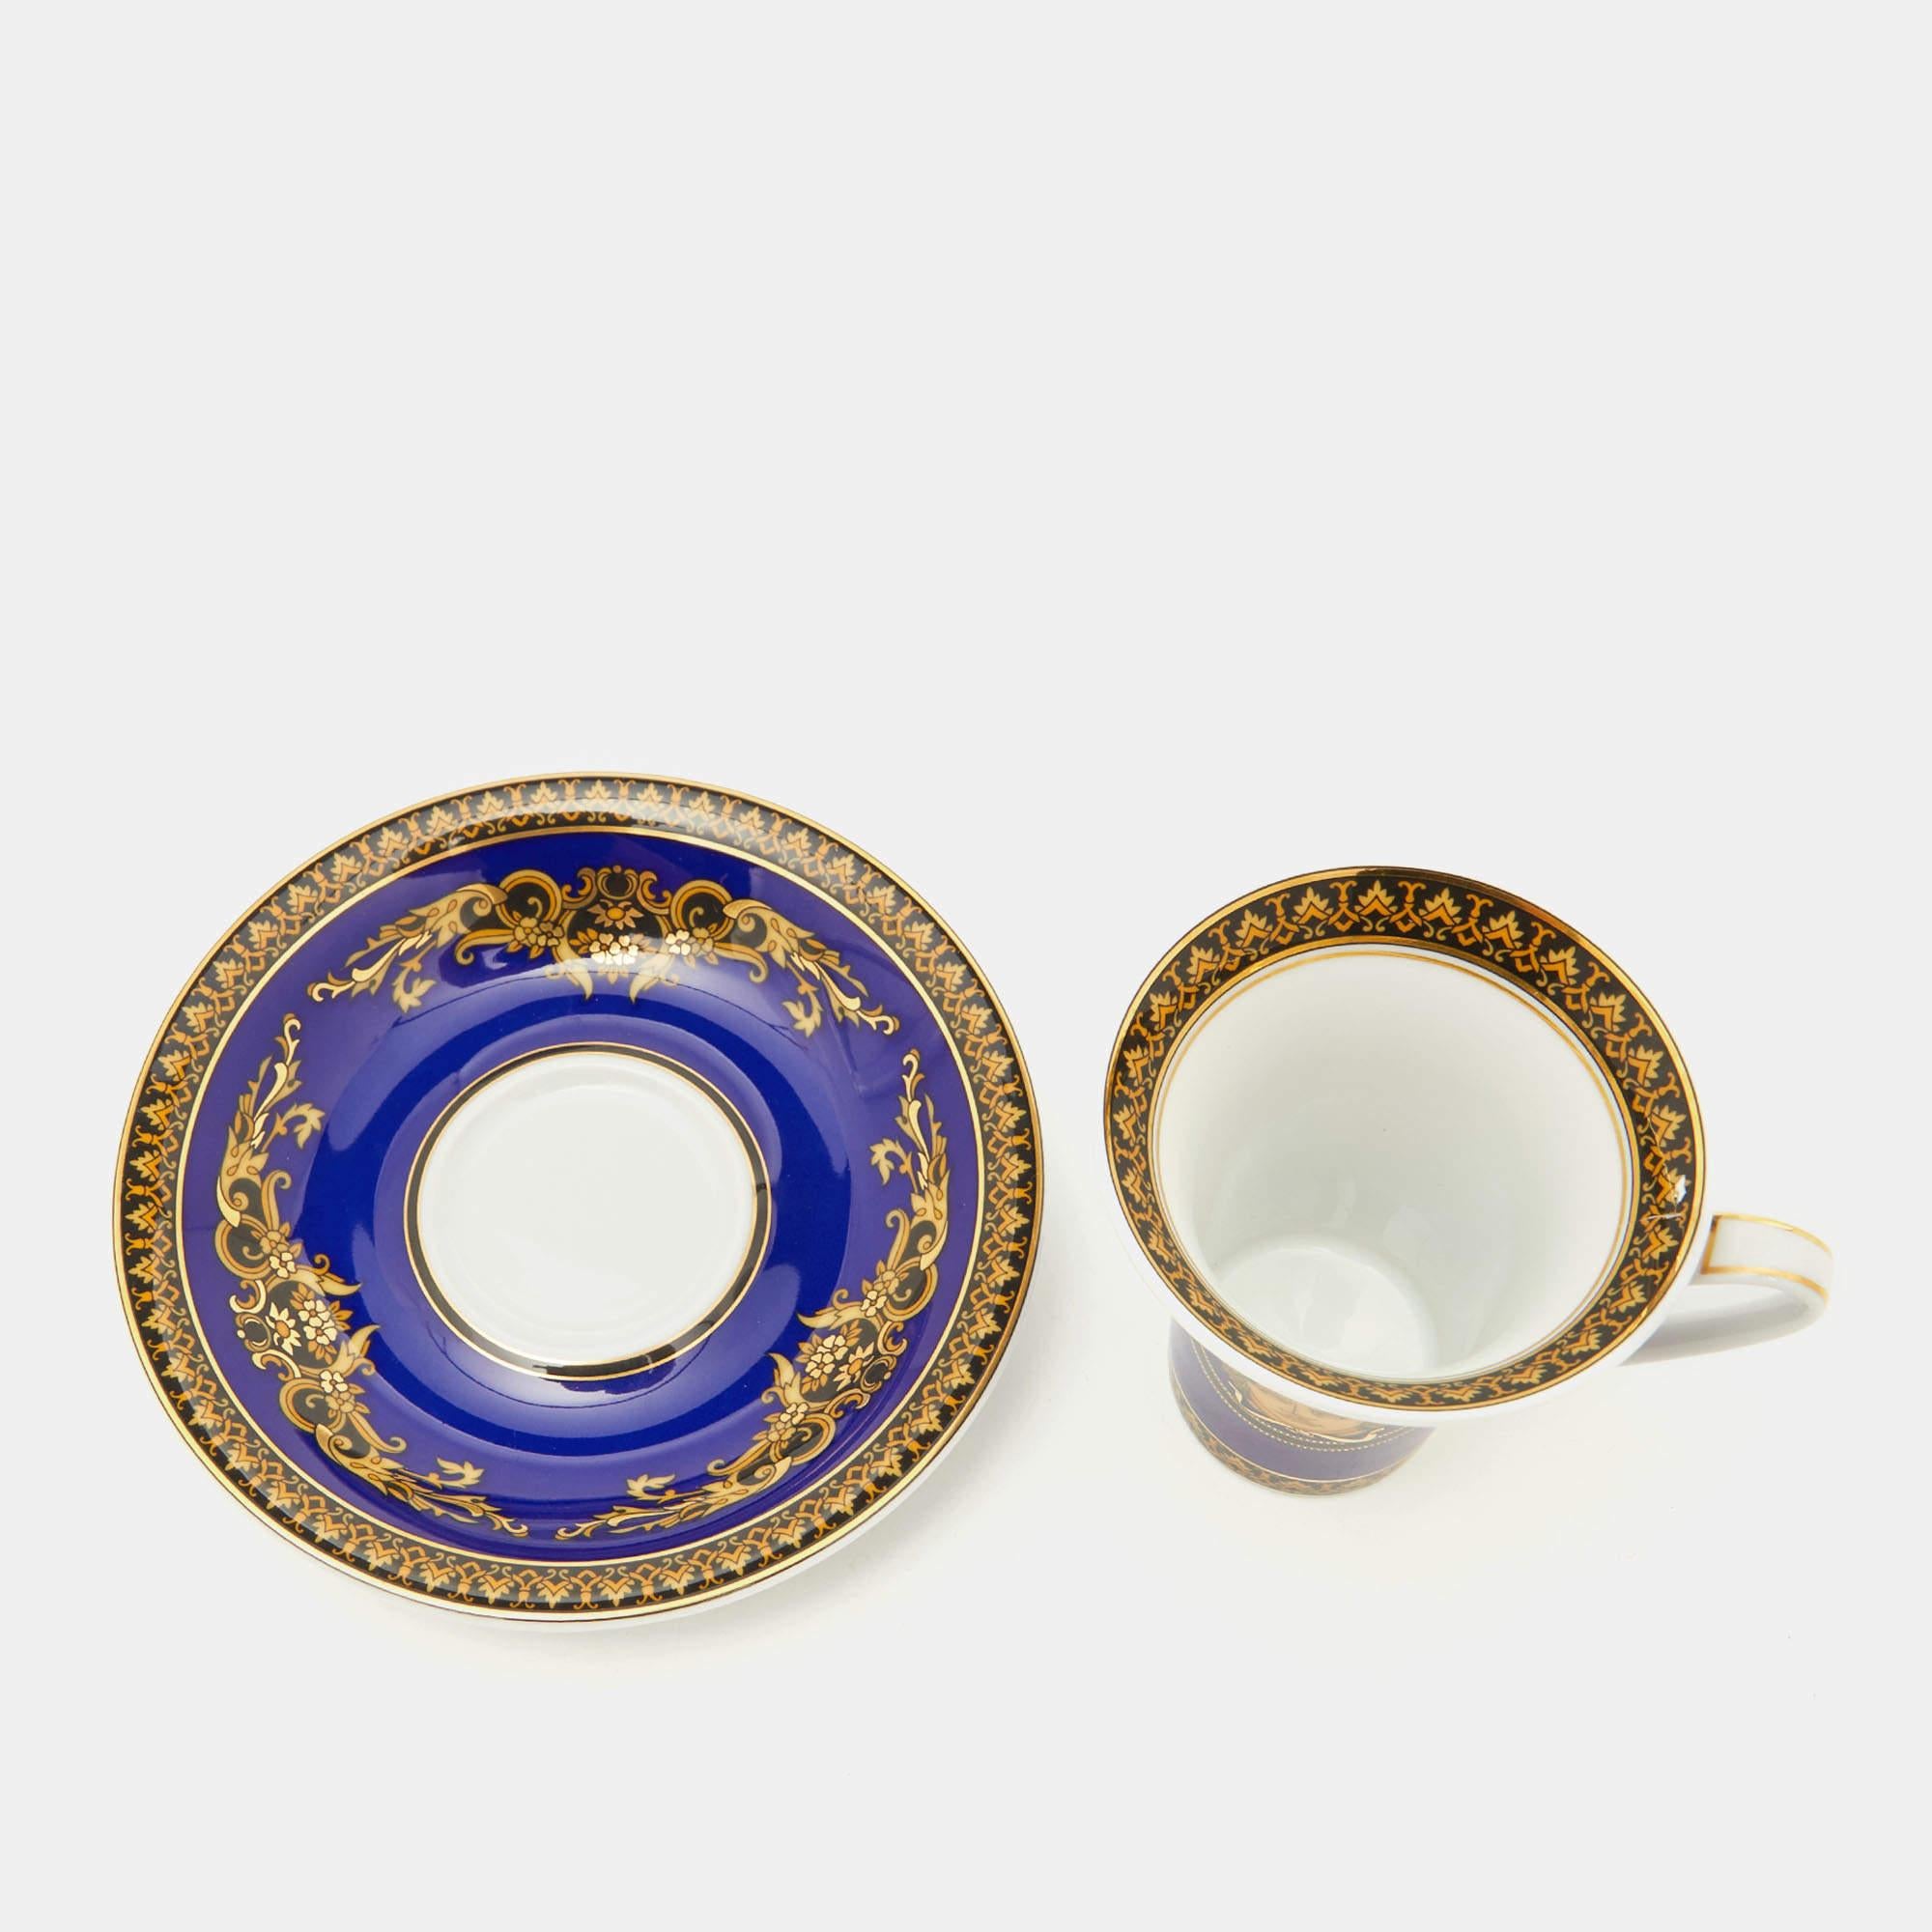 Enter Versace's magical world with the Medusa collection. Made in collaboration with Rosenthal, this set of espresso cup is made of porcelain and adorned with exquisite symbols of Medusa and other signature motifs.

Includes: Authenticity Card,